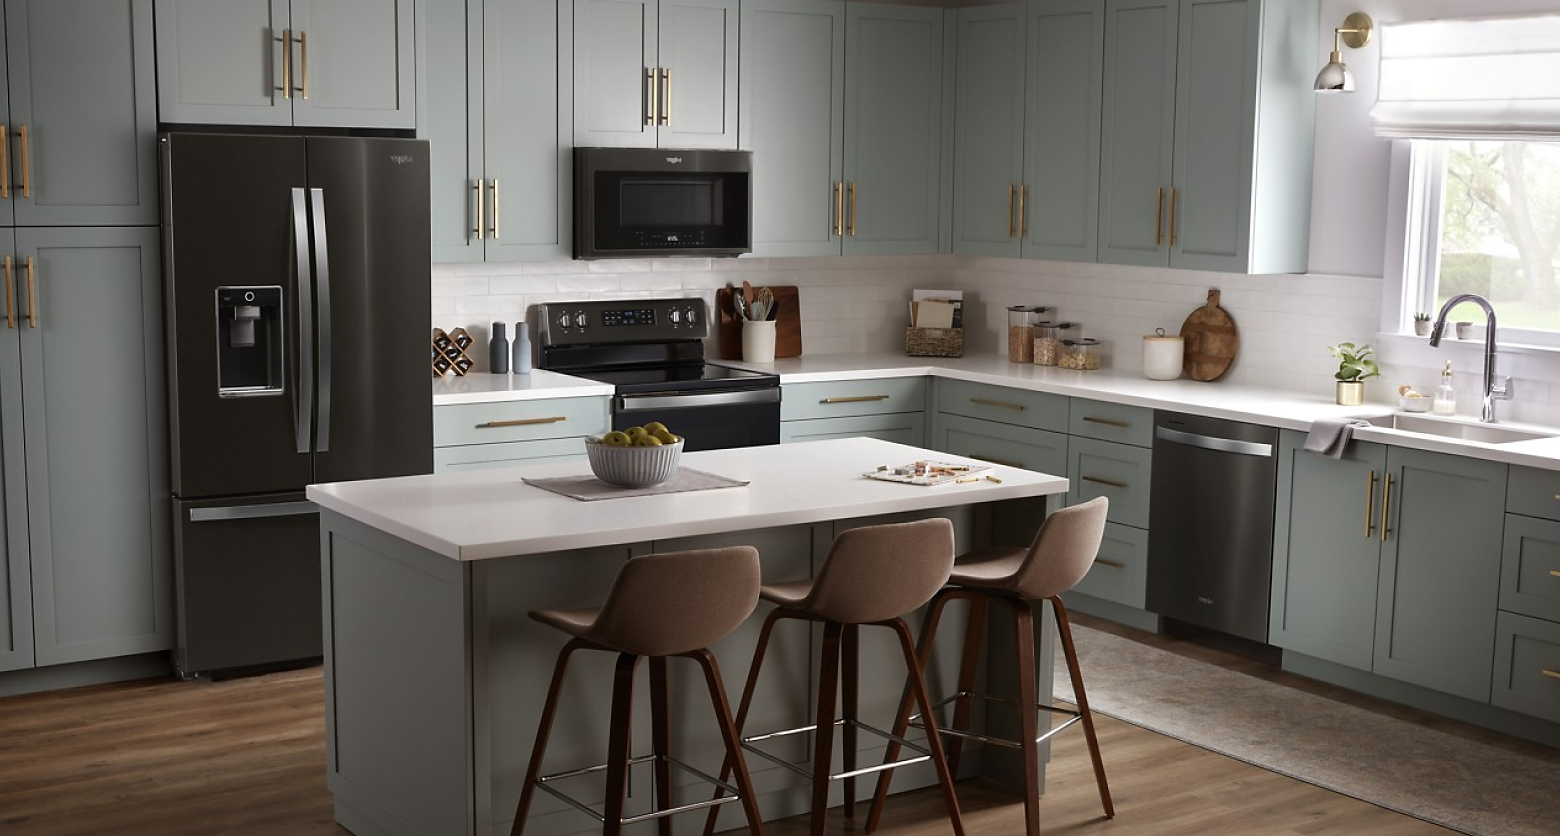 4 Small Appliance Colour Trends to Brighten Up Your Kitchen